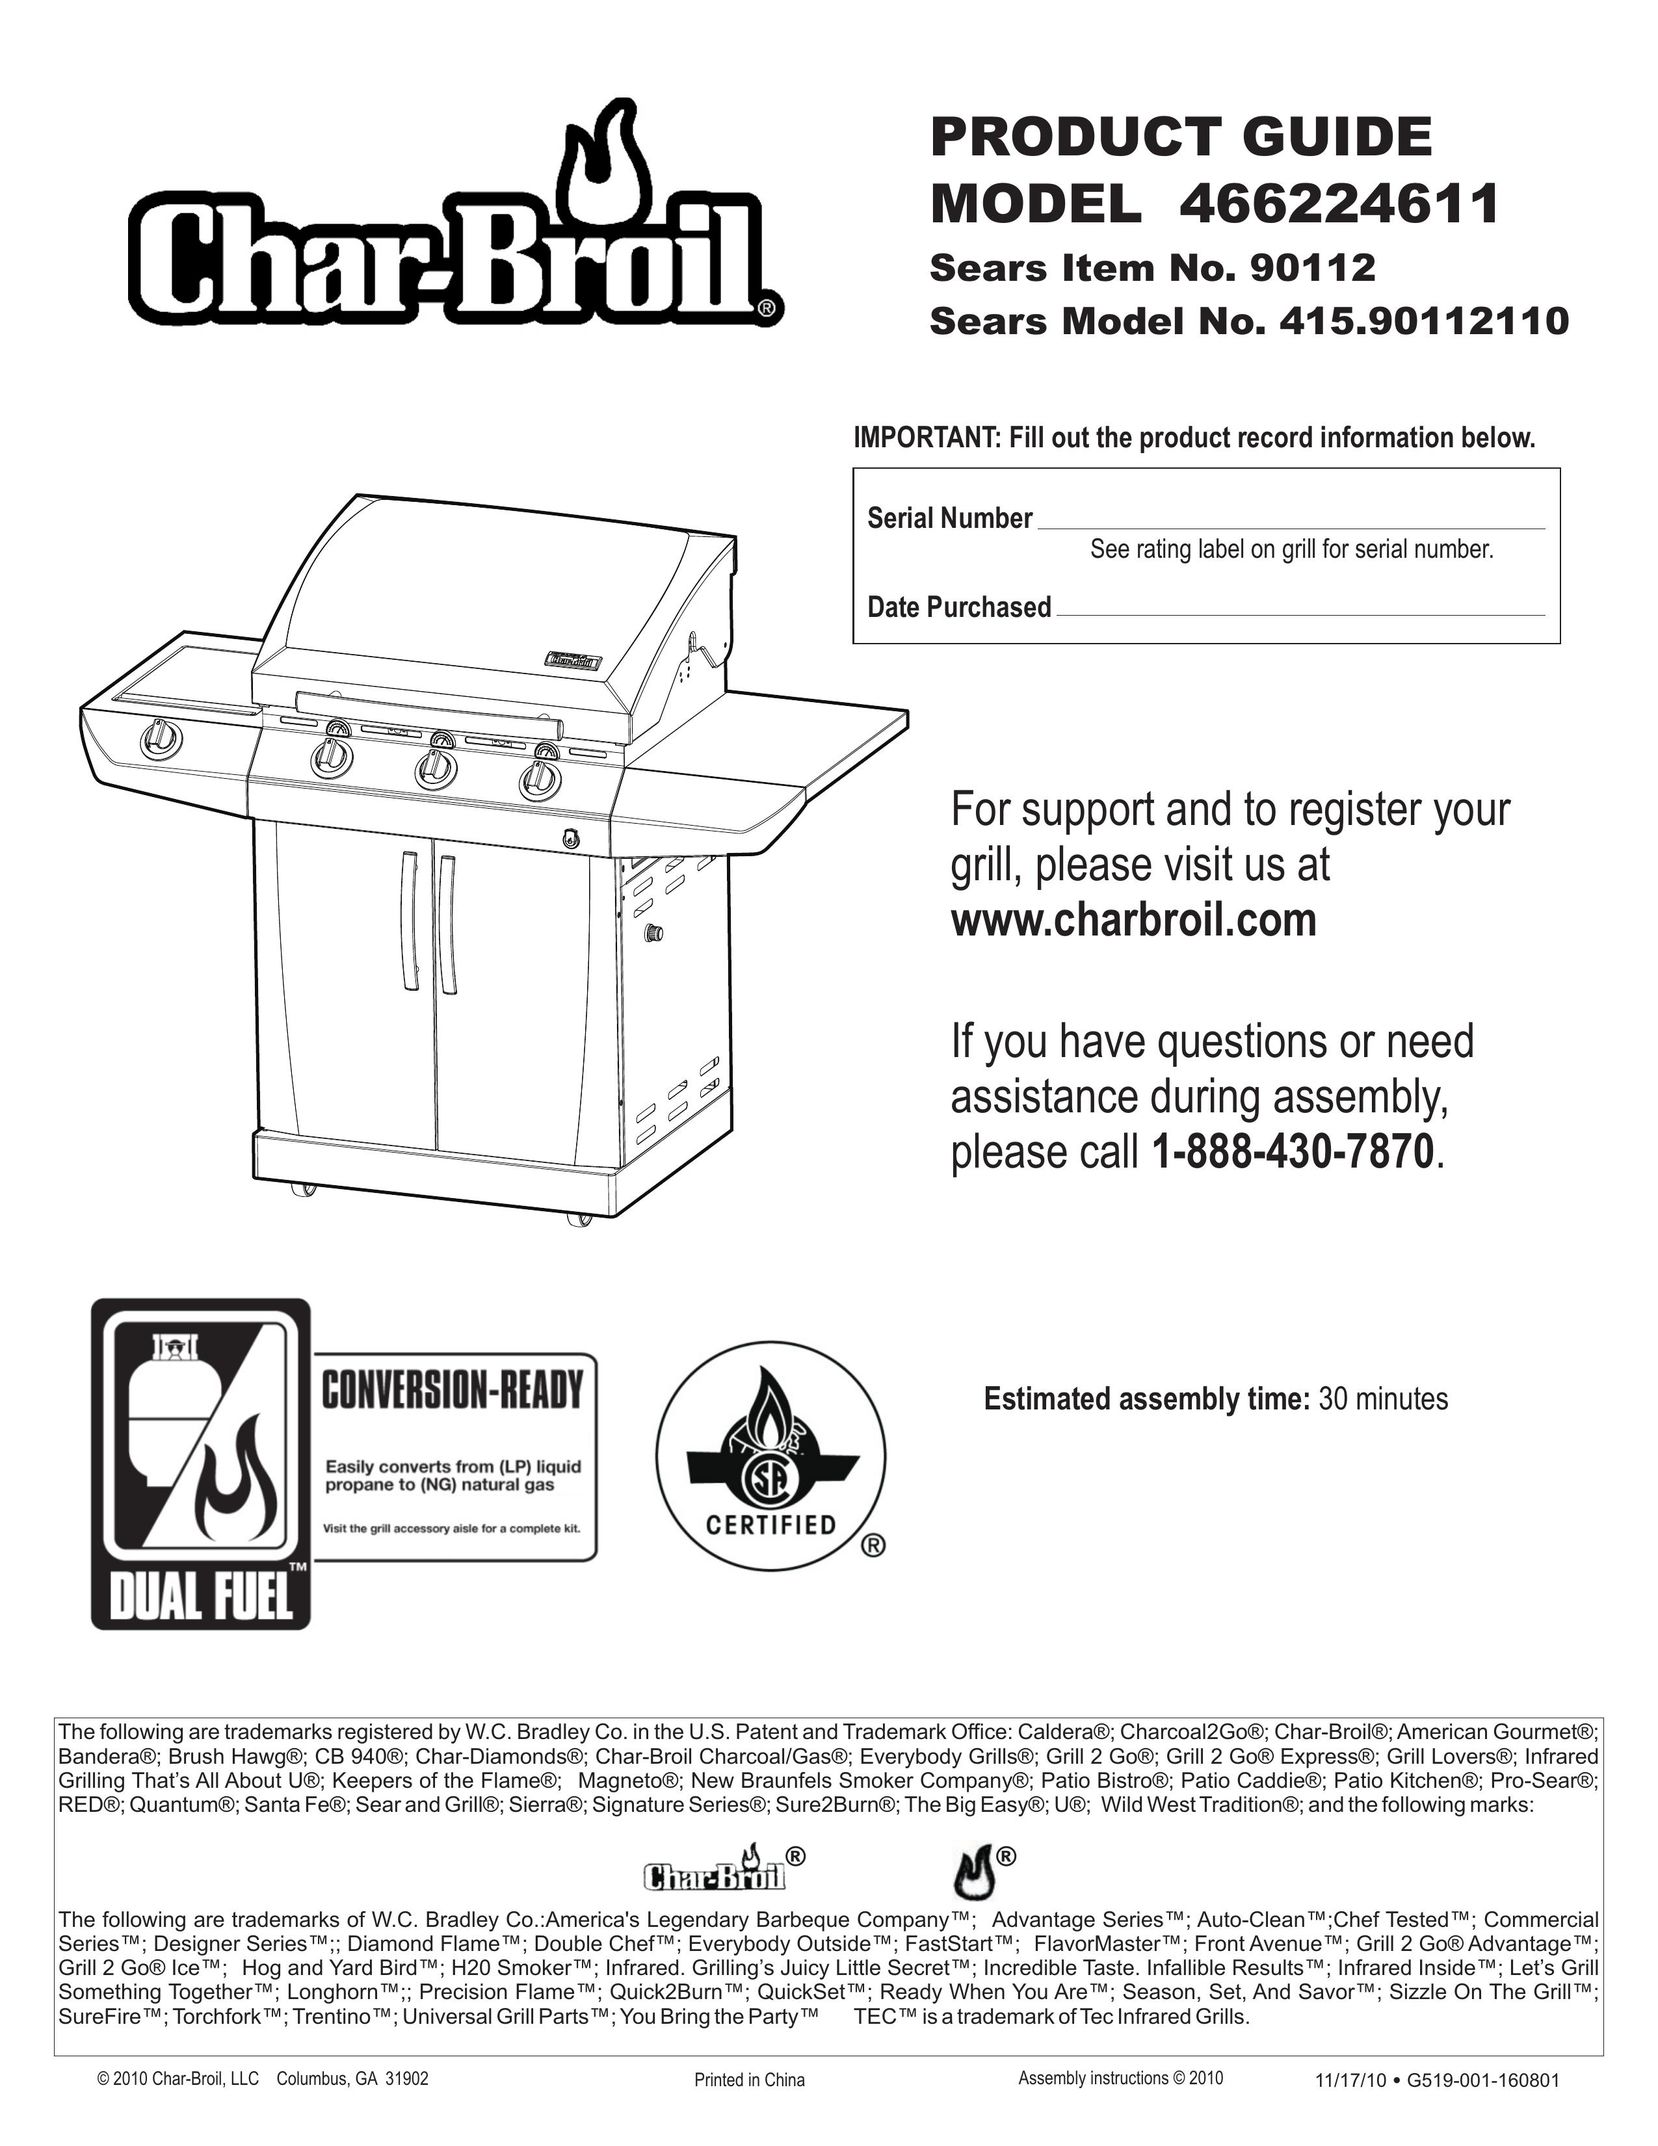 Char-Broil 466224611 Convection Oven User Manual